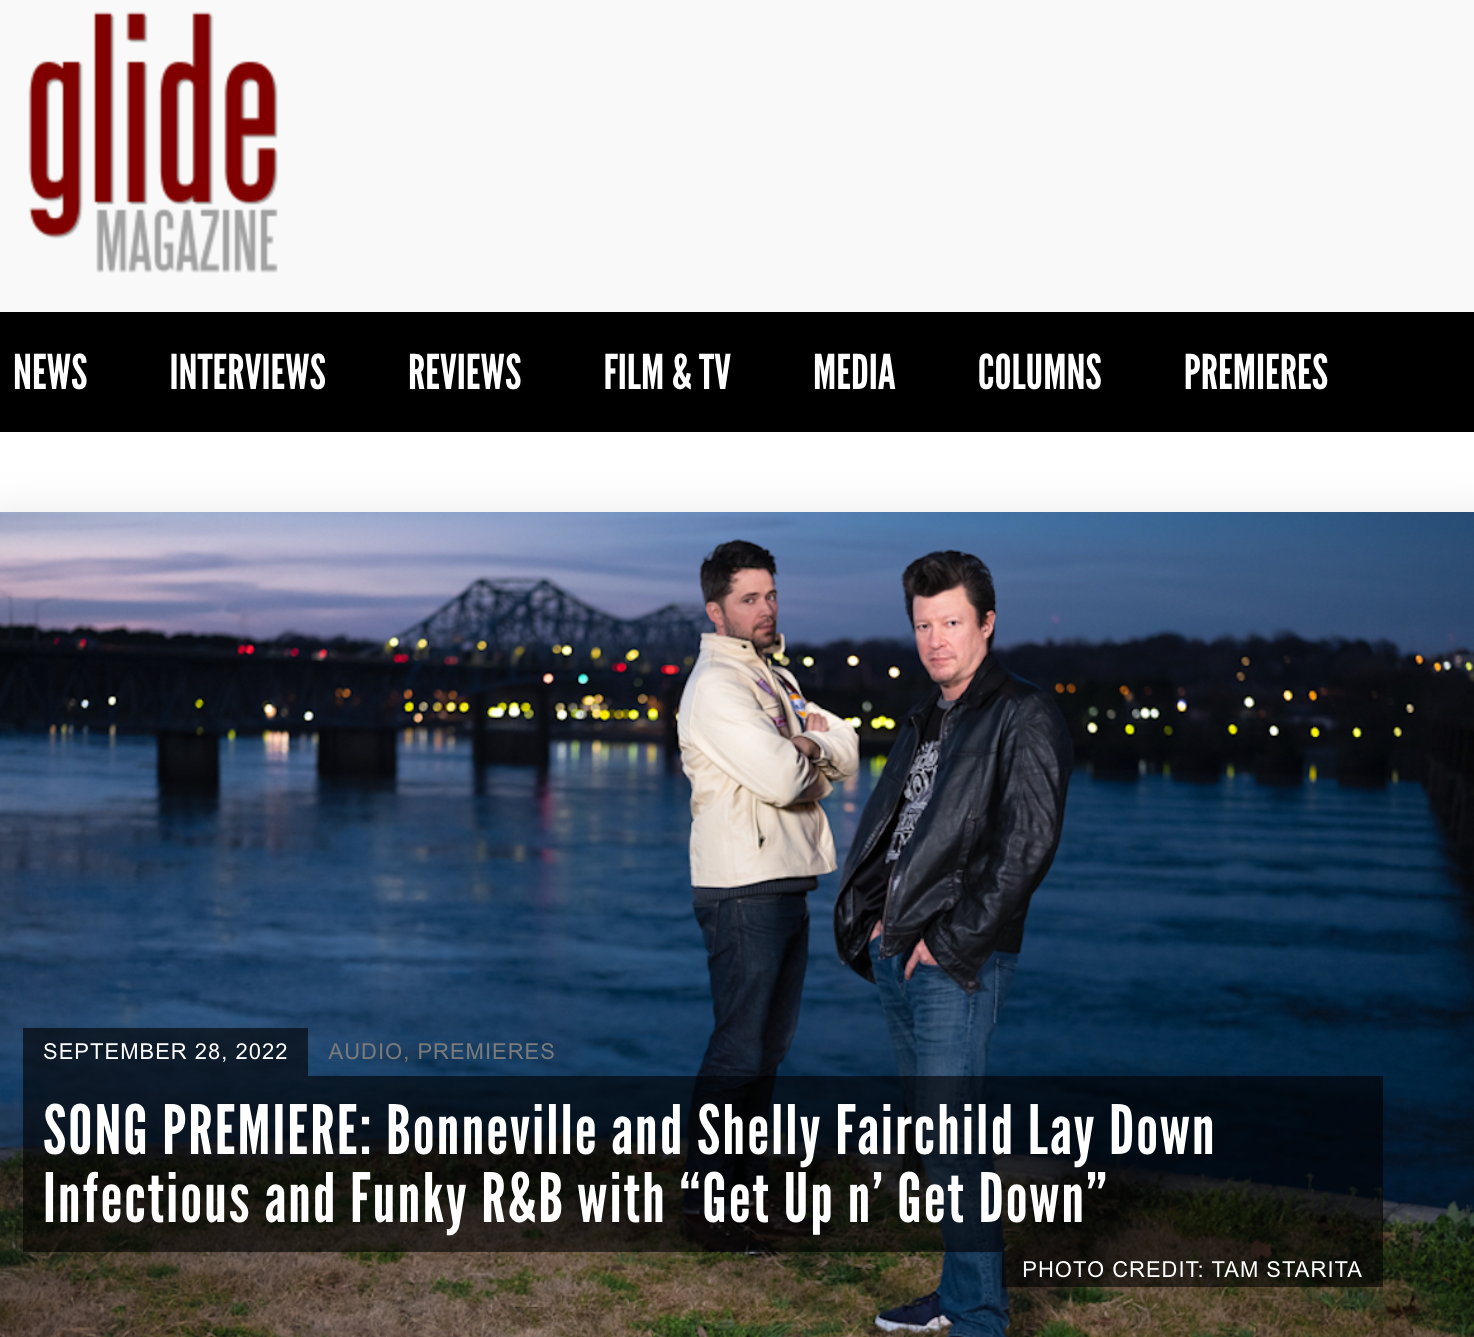 GLIDE Magazine Premieres ‘Get Up n’ Get Down’ feat Shelly Fairchild